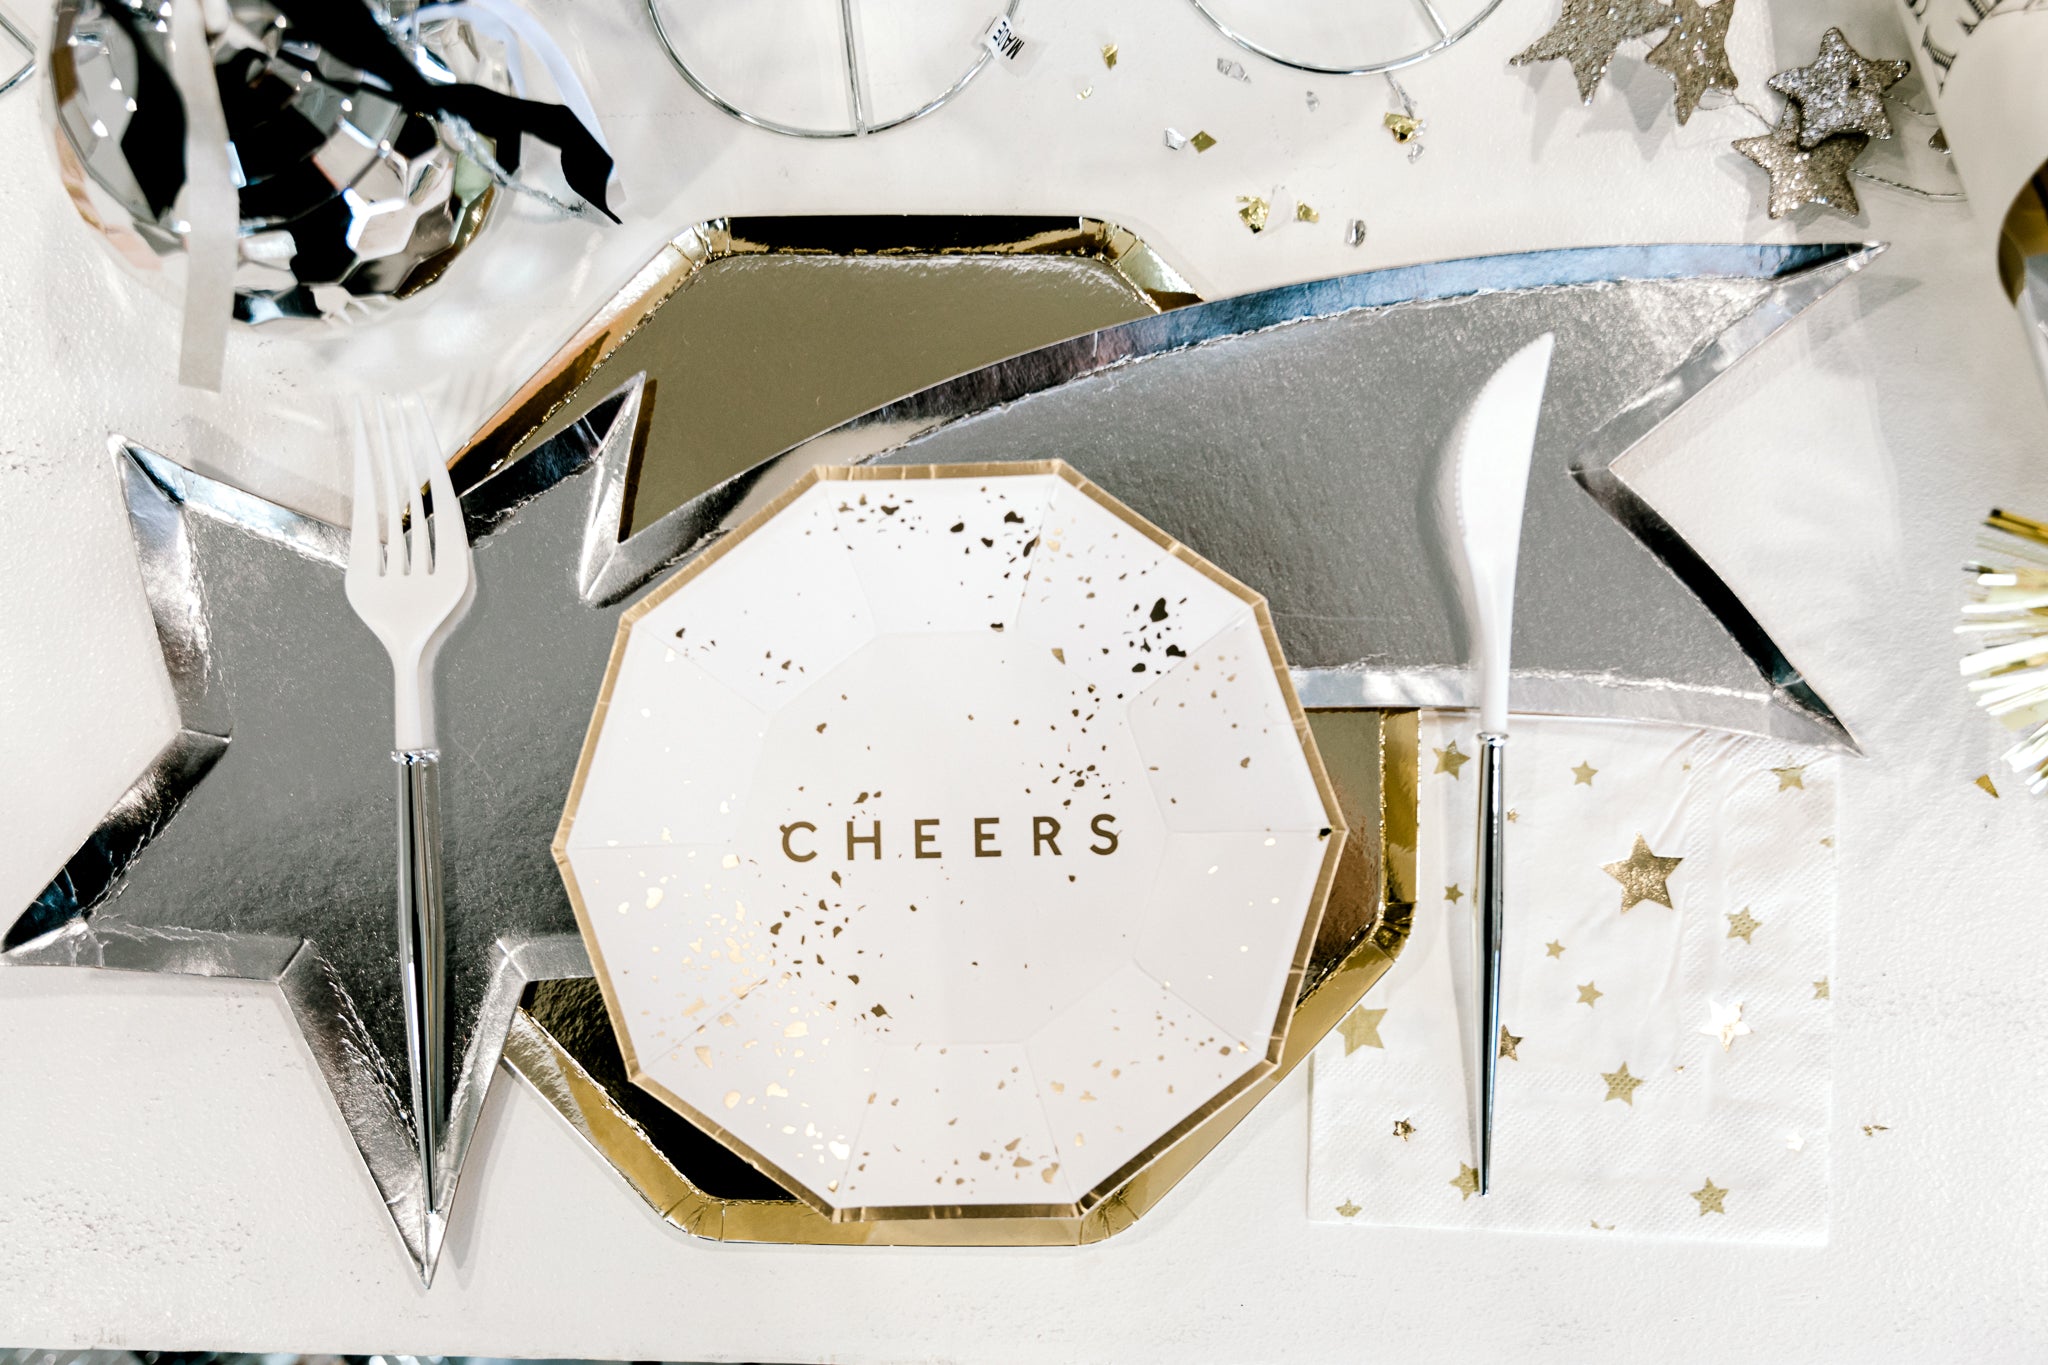 New Years Eve disco themed place setting 